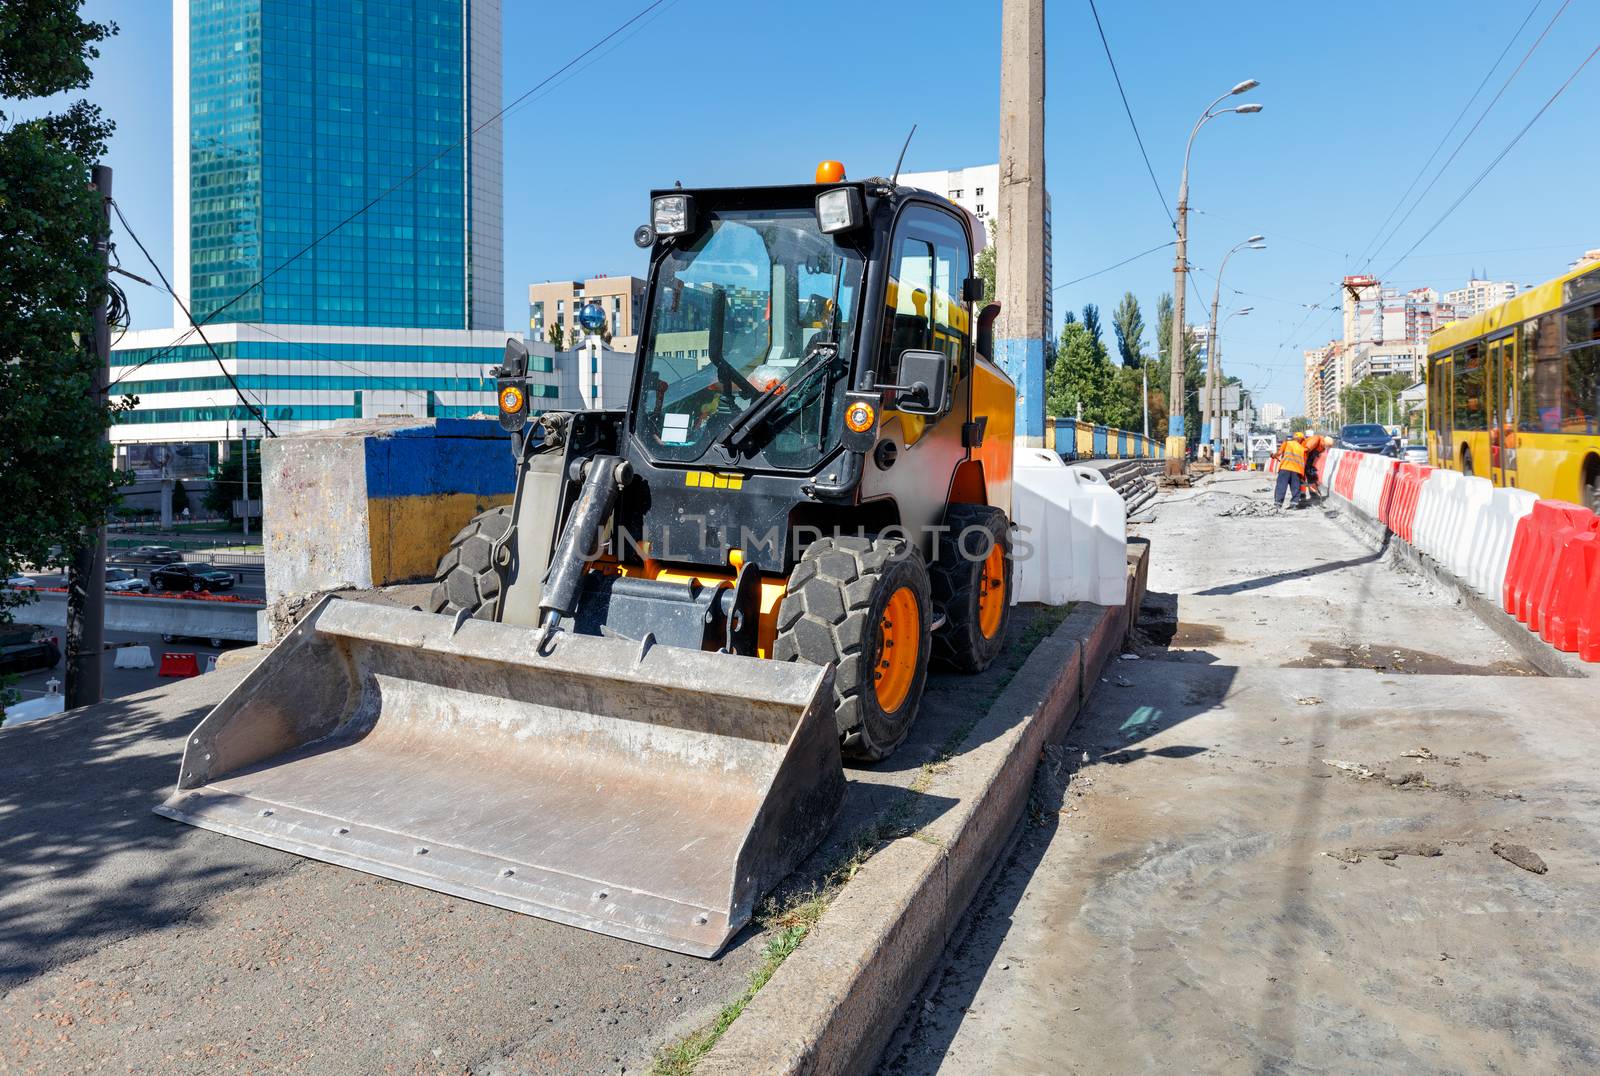 Lightweight and maneuverable construction bulldozer stands when repairing the road. by Sergii